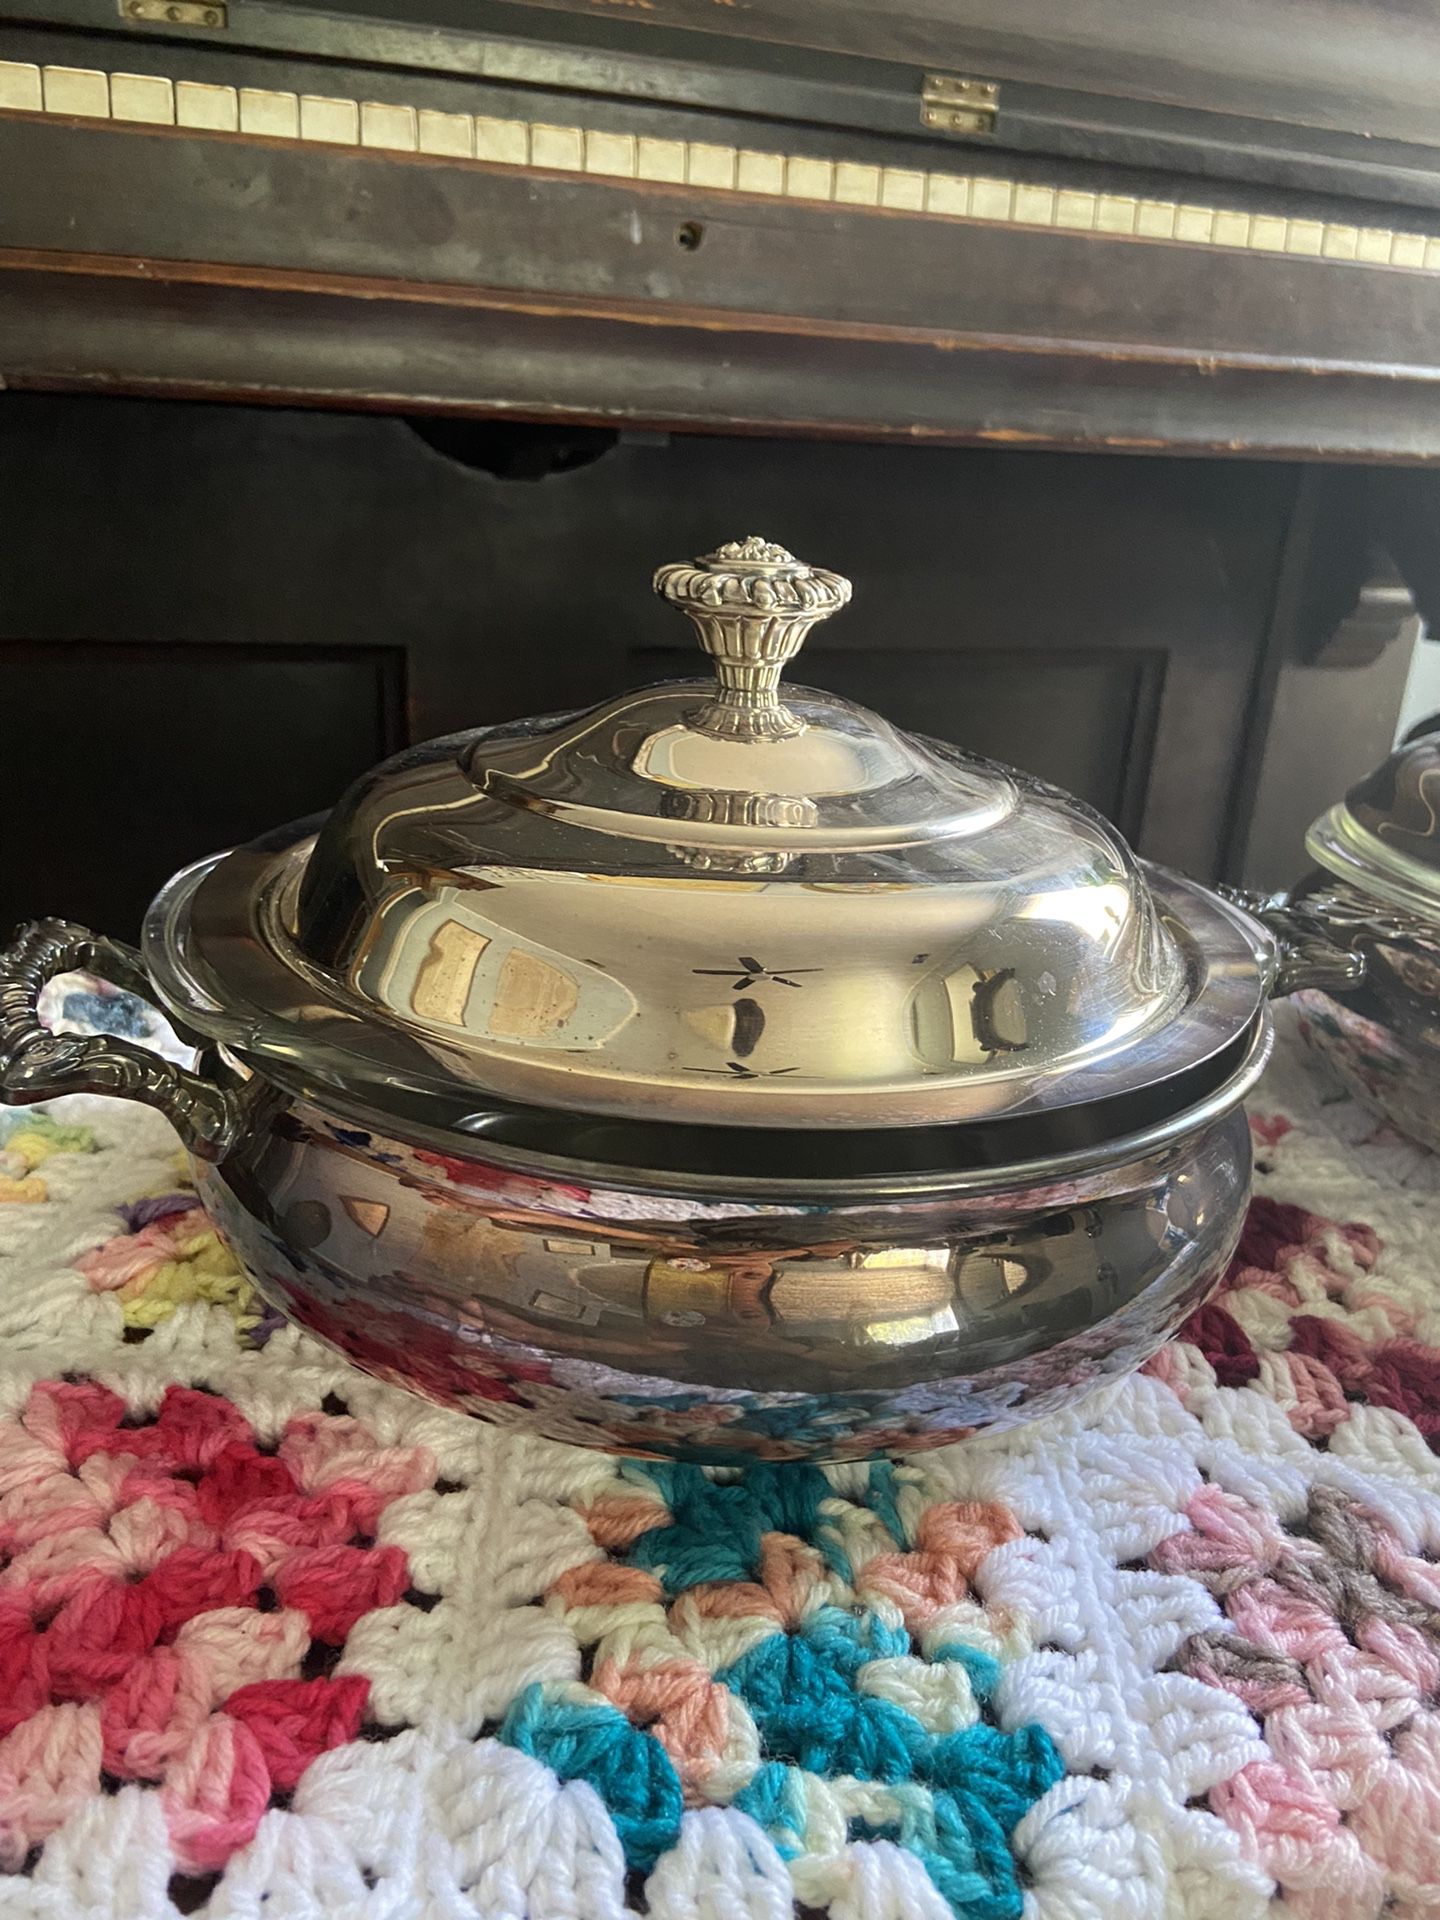 Vintage Silver Casserole Dishes